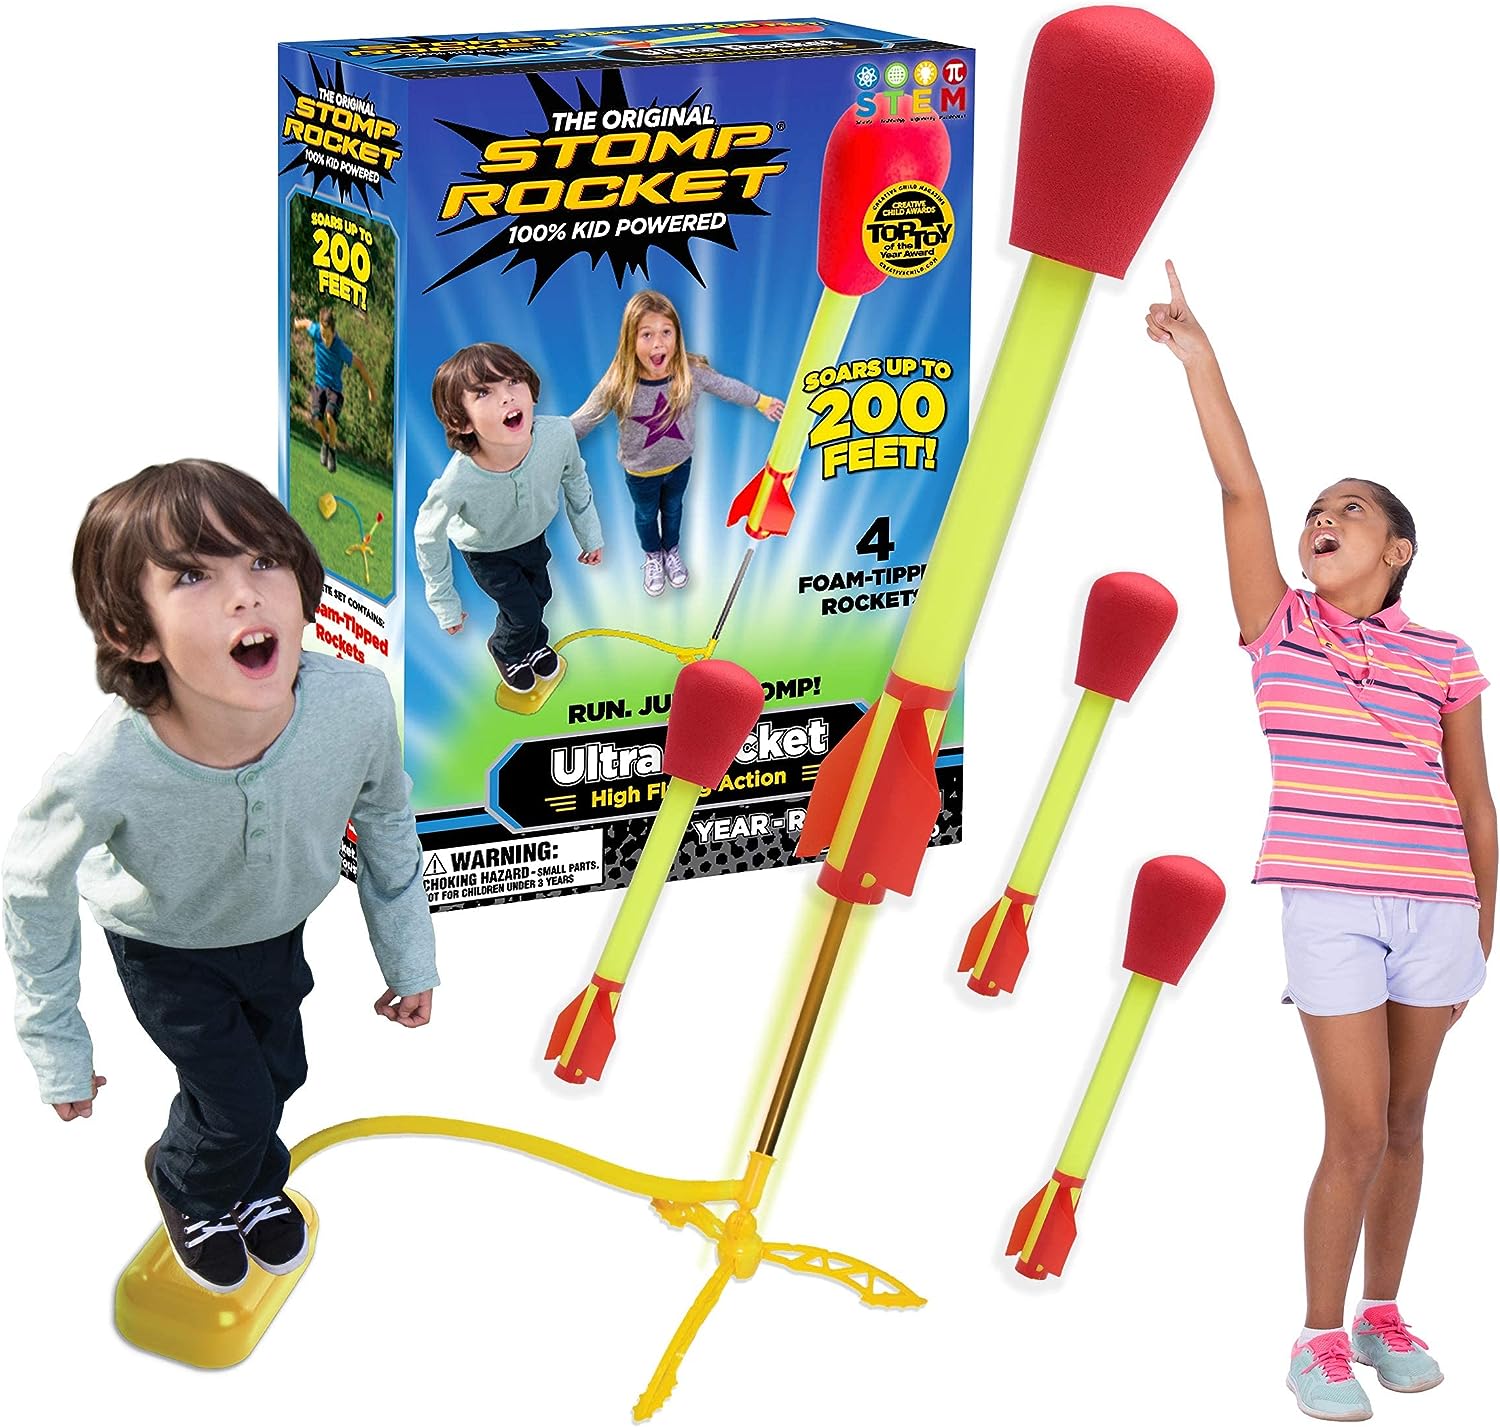 Having Fun With The Stomp Rocket